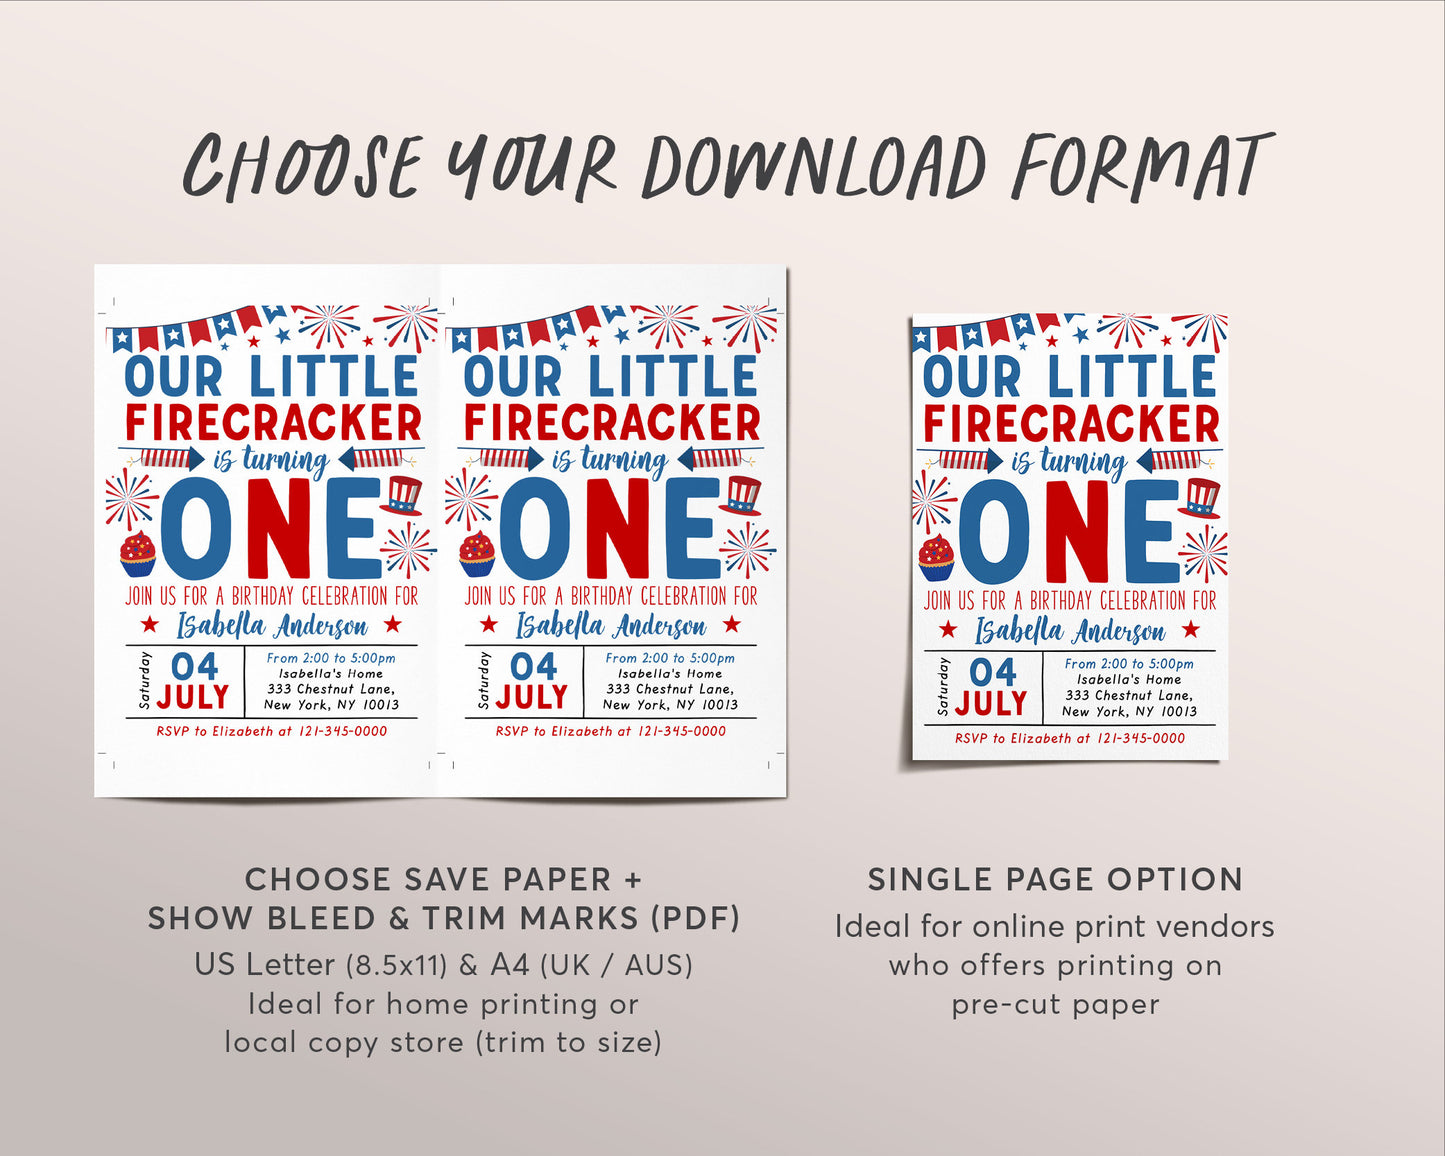 4th of July First Birthday Invitation Editable Template, Little Firecracker Patriotic Birthday Invite, Red White and Blue Stars And Stripes